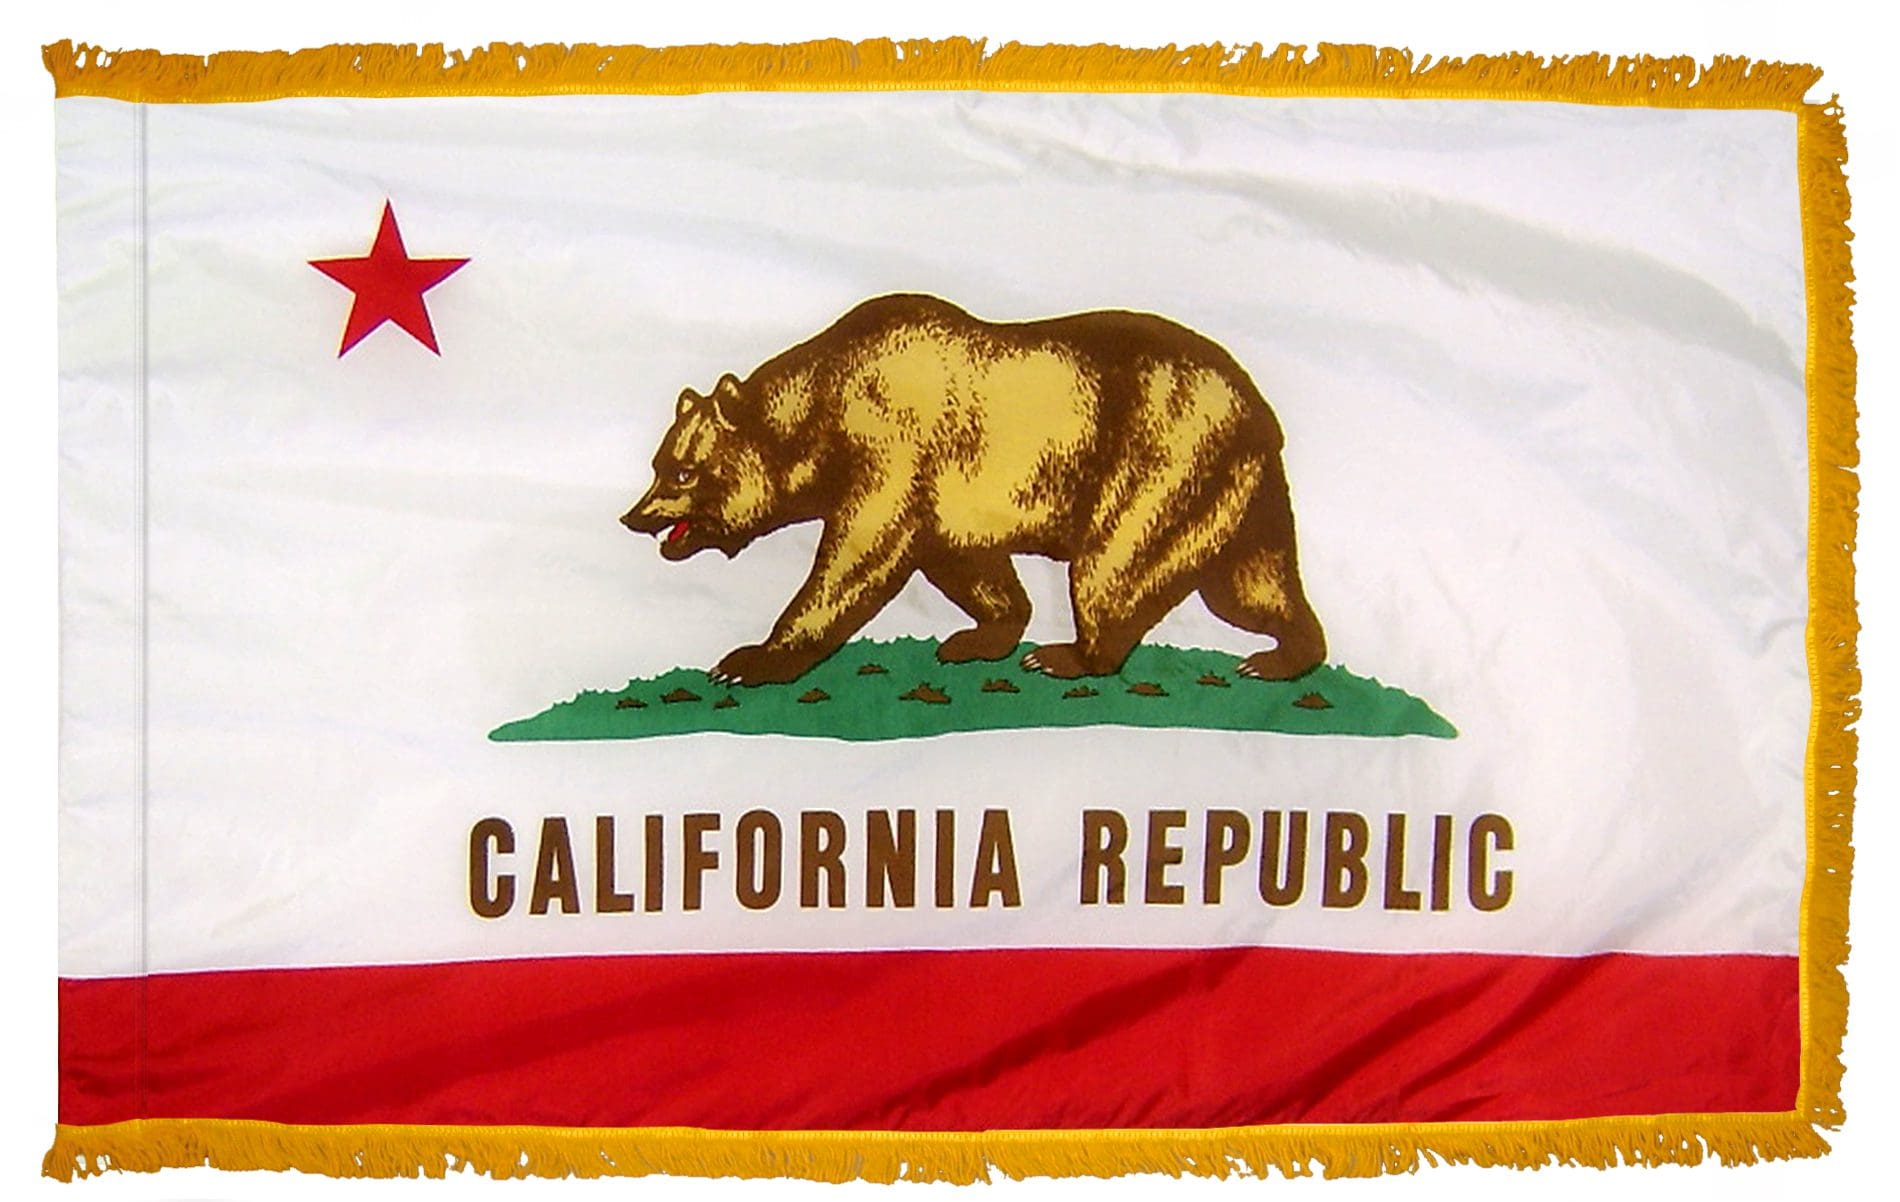 California State Flag 3x5 or 4x6 ft. (fringed)